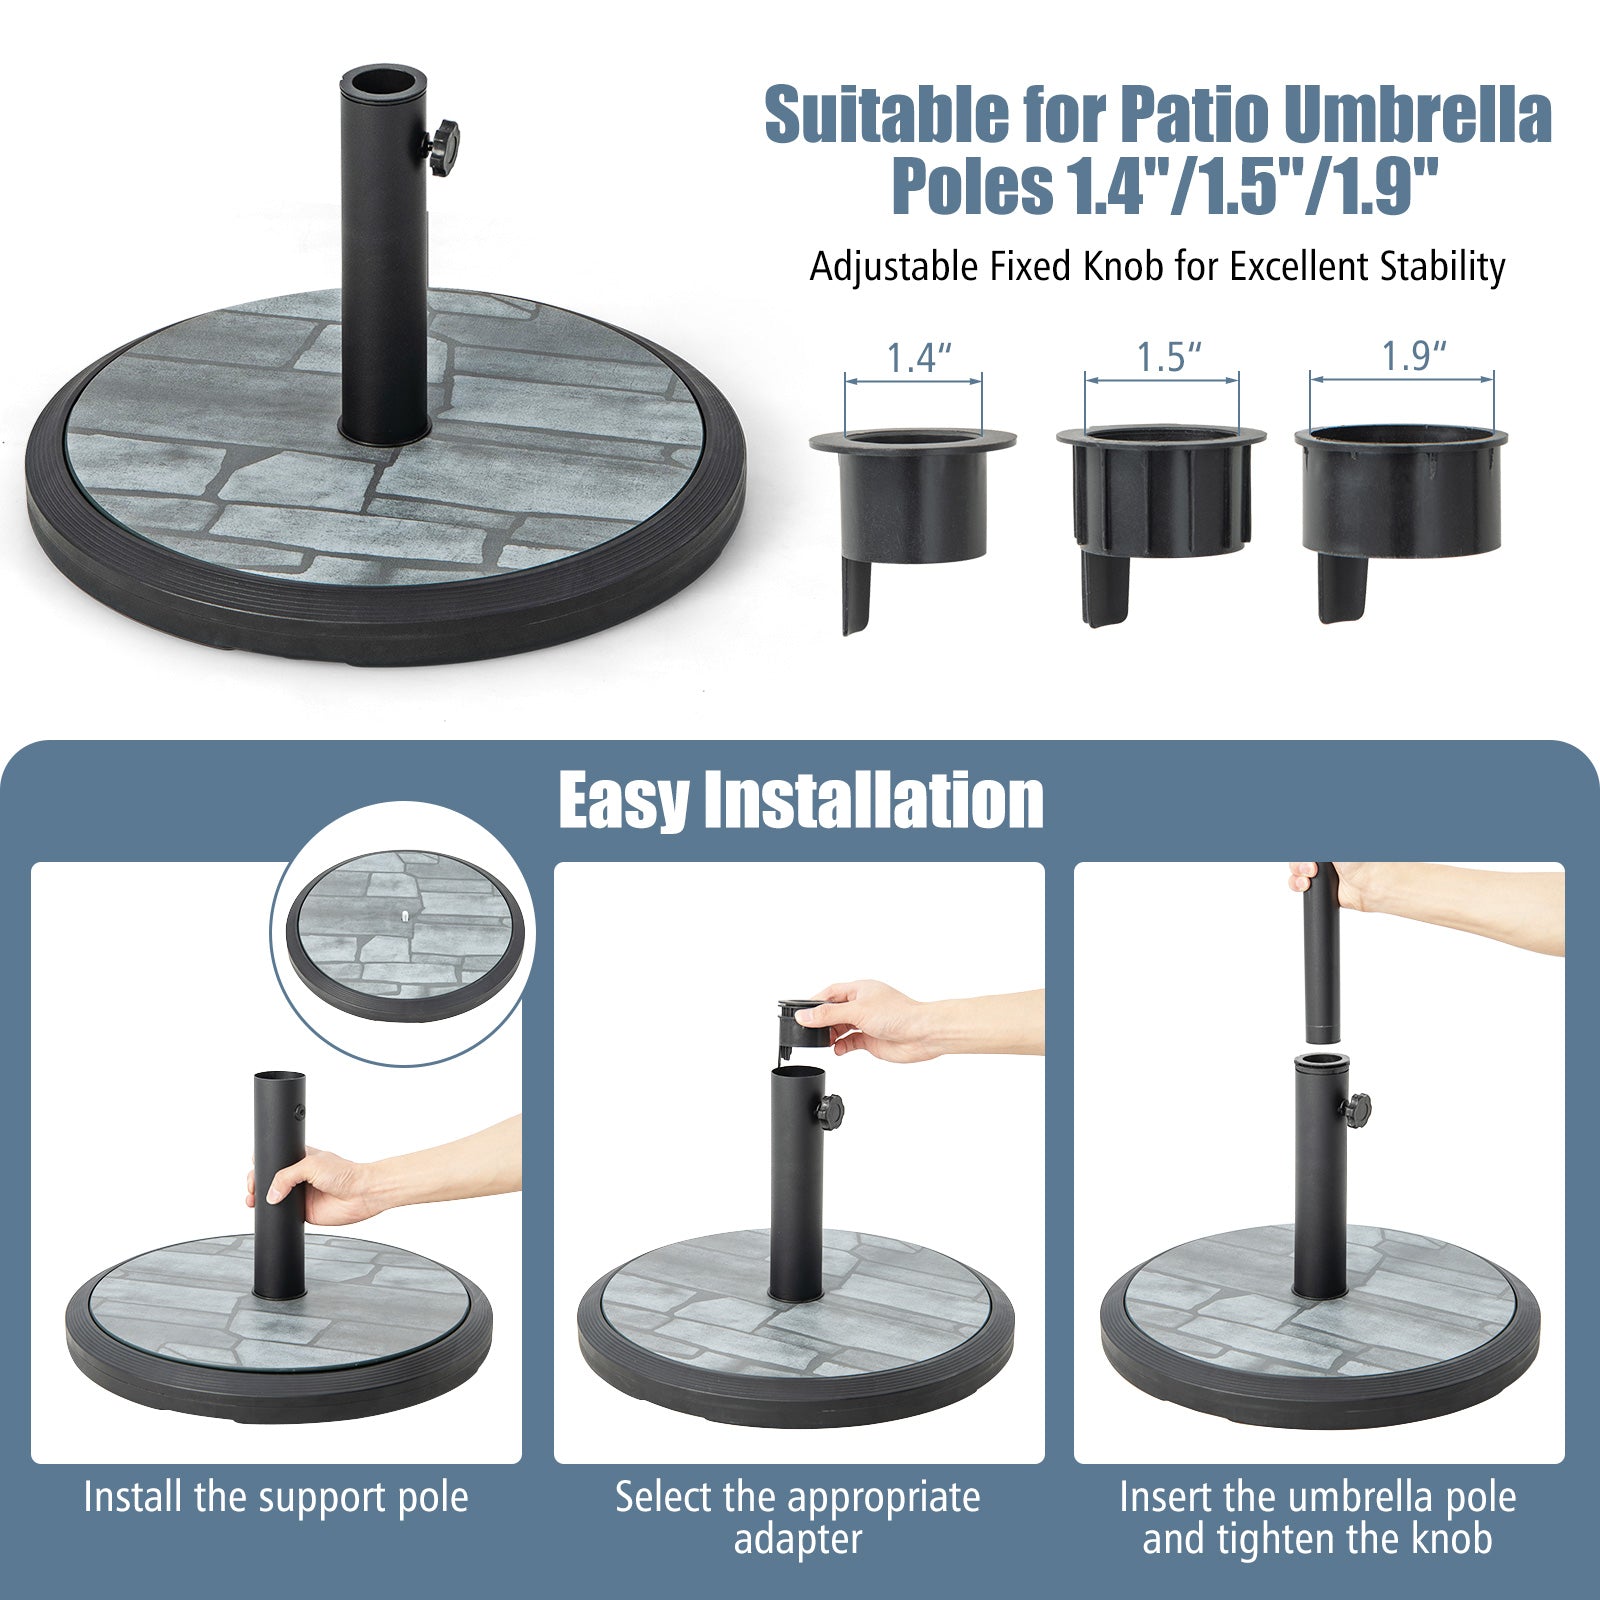 Compatible with 6-10 FT Umbrella: The patio umbrella base is designed with three adapters and a metal support pole, making it suitable for most 6-10 ft market umbrellas and patio table umbrellas. It can accommodate umbrella poles with diameters of 1.4", 1.5", or 1.9".